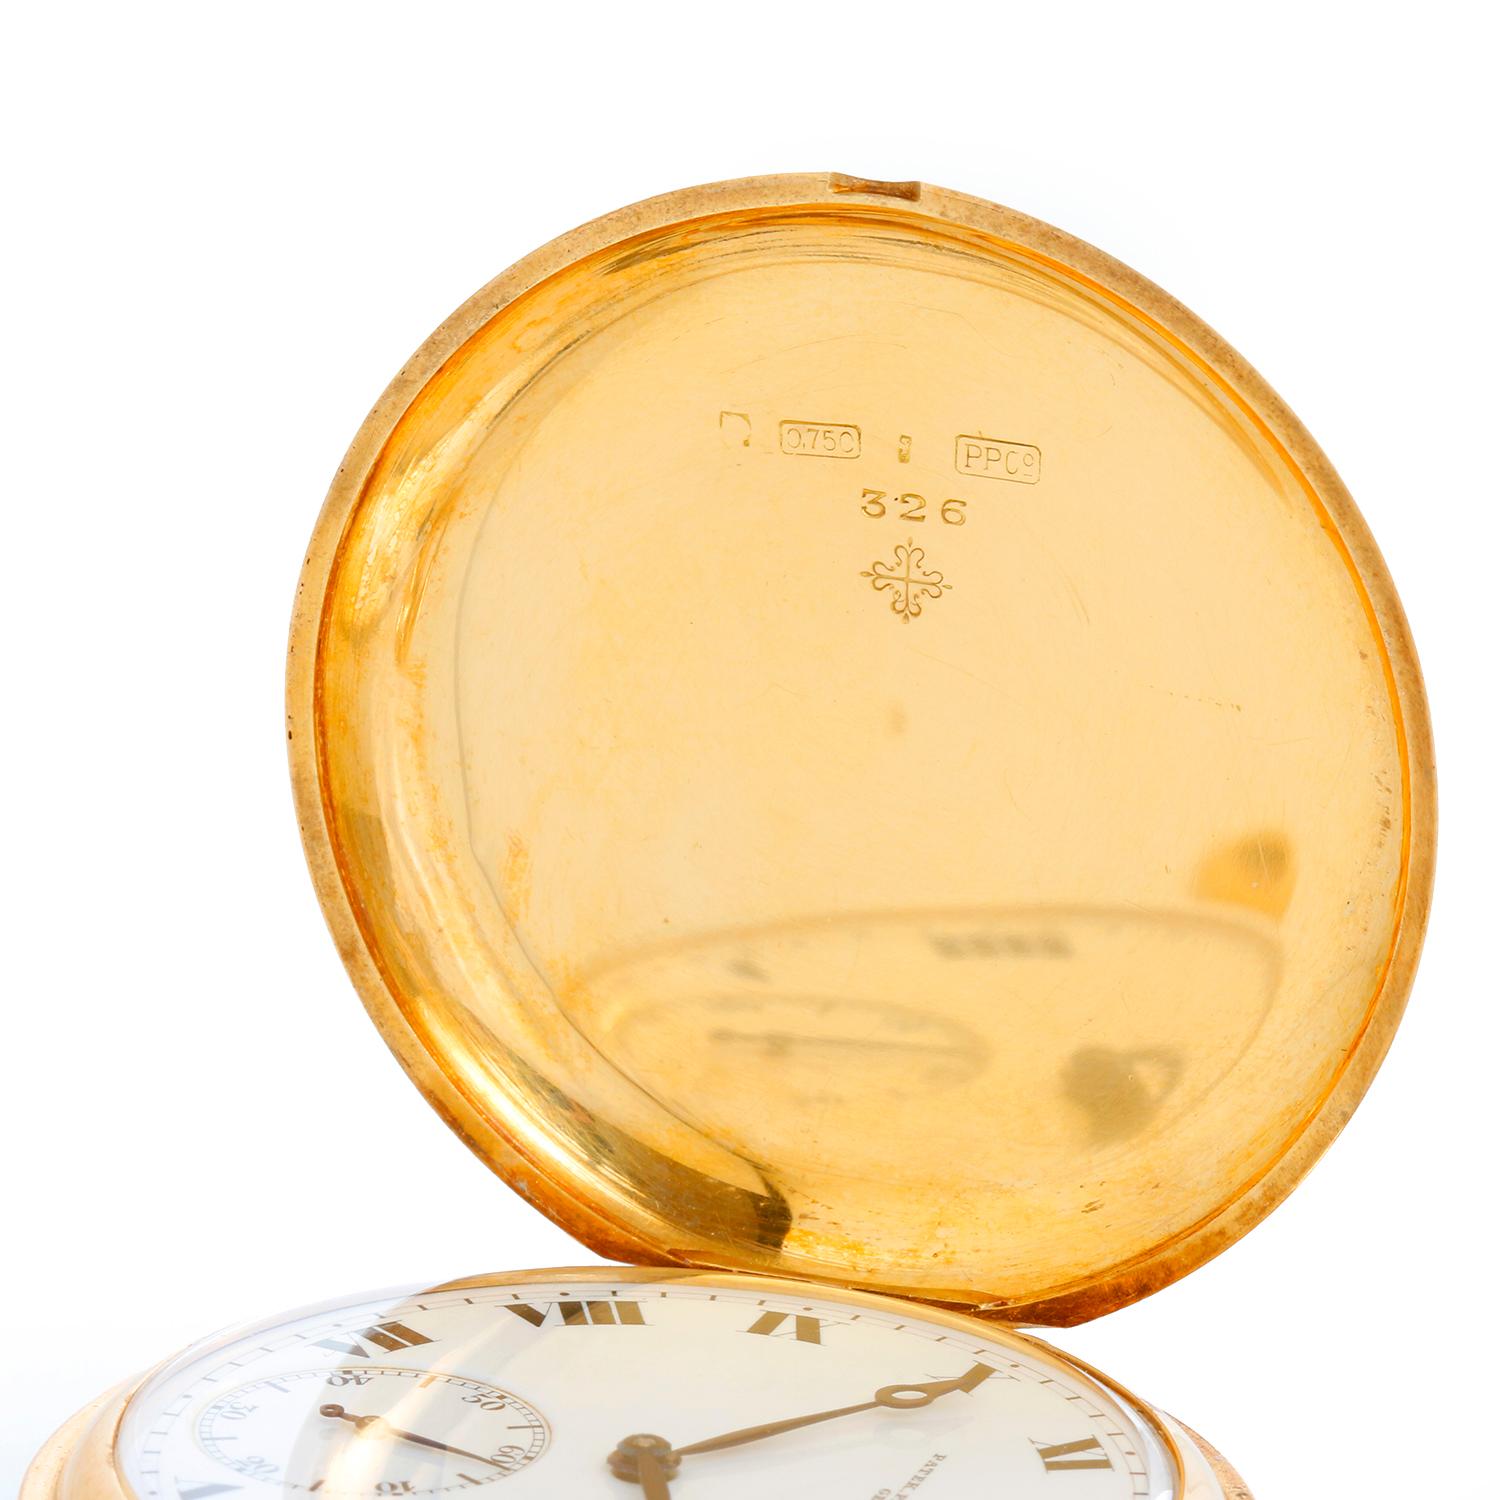 Patek Philippe 18K Hunting Case Roman Numerals Pocket Watch - Manual winding. 18K Yellow Gold case (45 mm). White dial with black Roman numerals sub seconds at 6 o'clock position; blue hands. Case & dial are signed. Case & dial are signed. Pre-owned